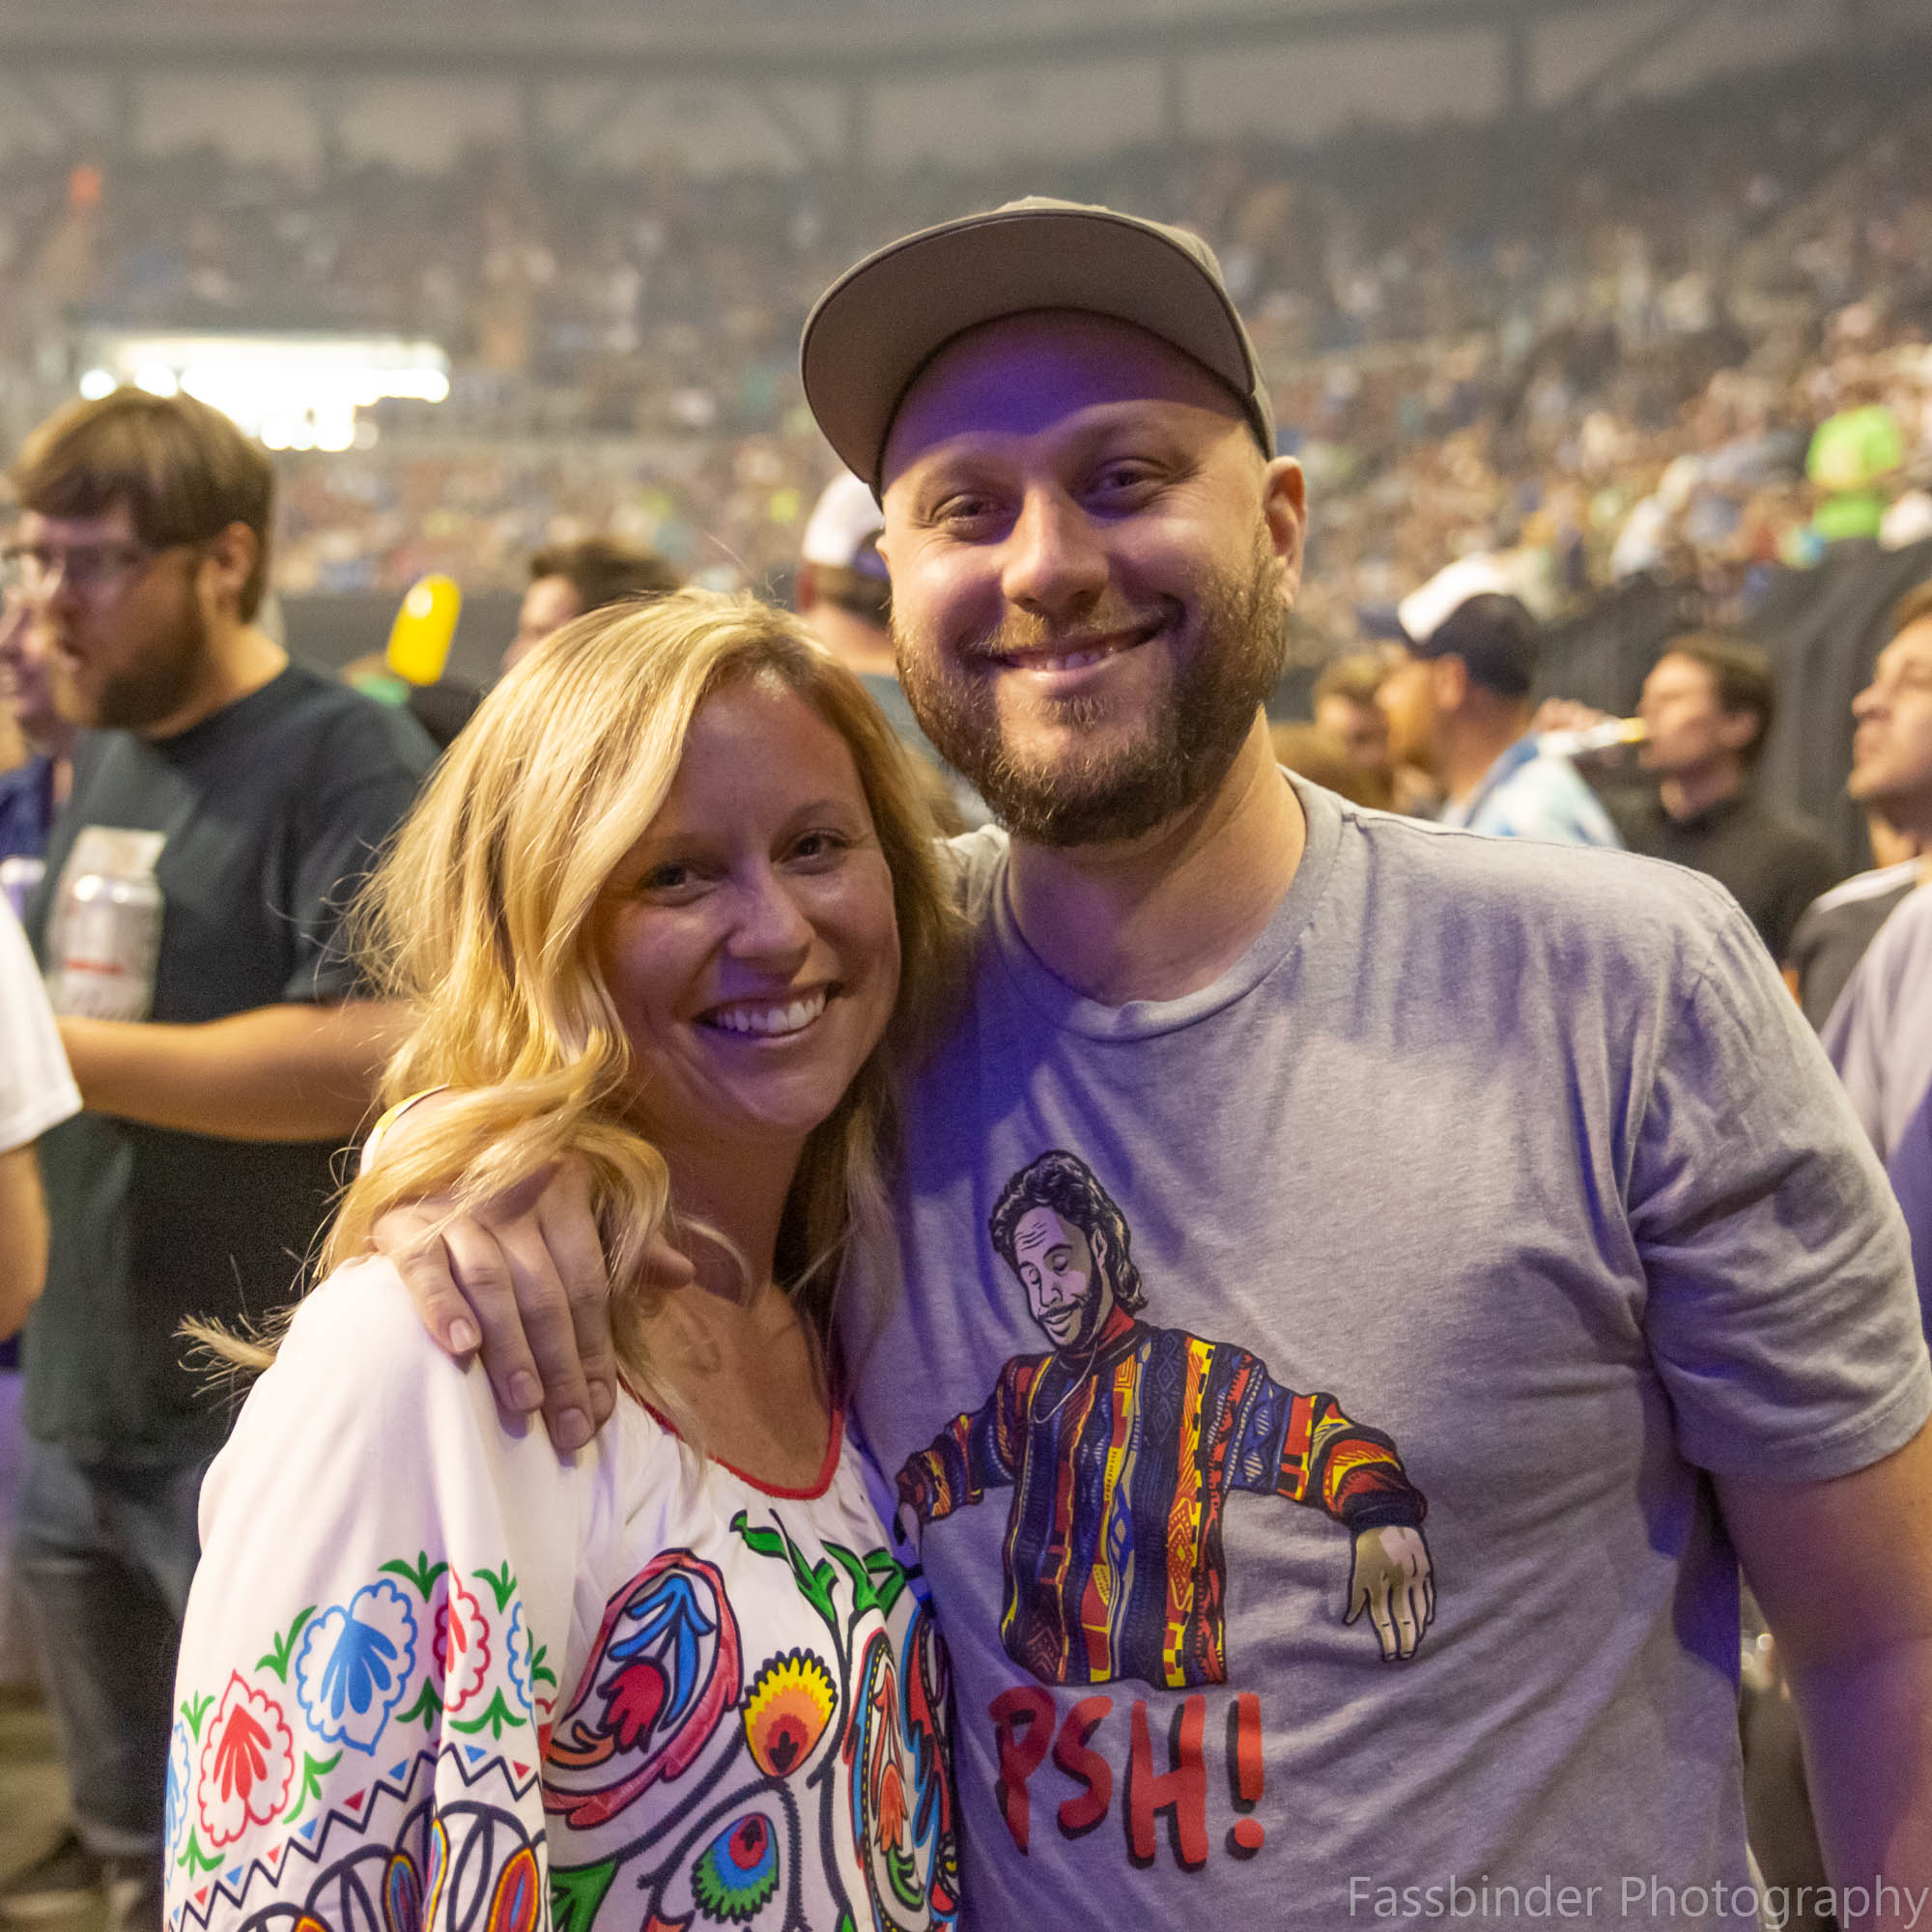 phish in st louis night one tour kickoff live music blog fassbinder photography 2019